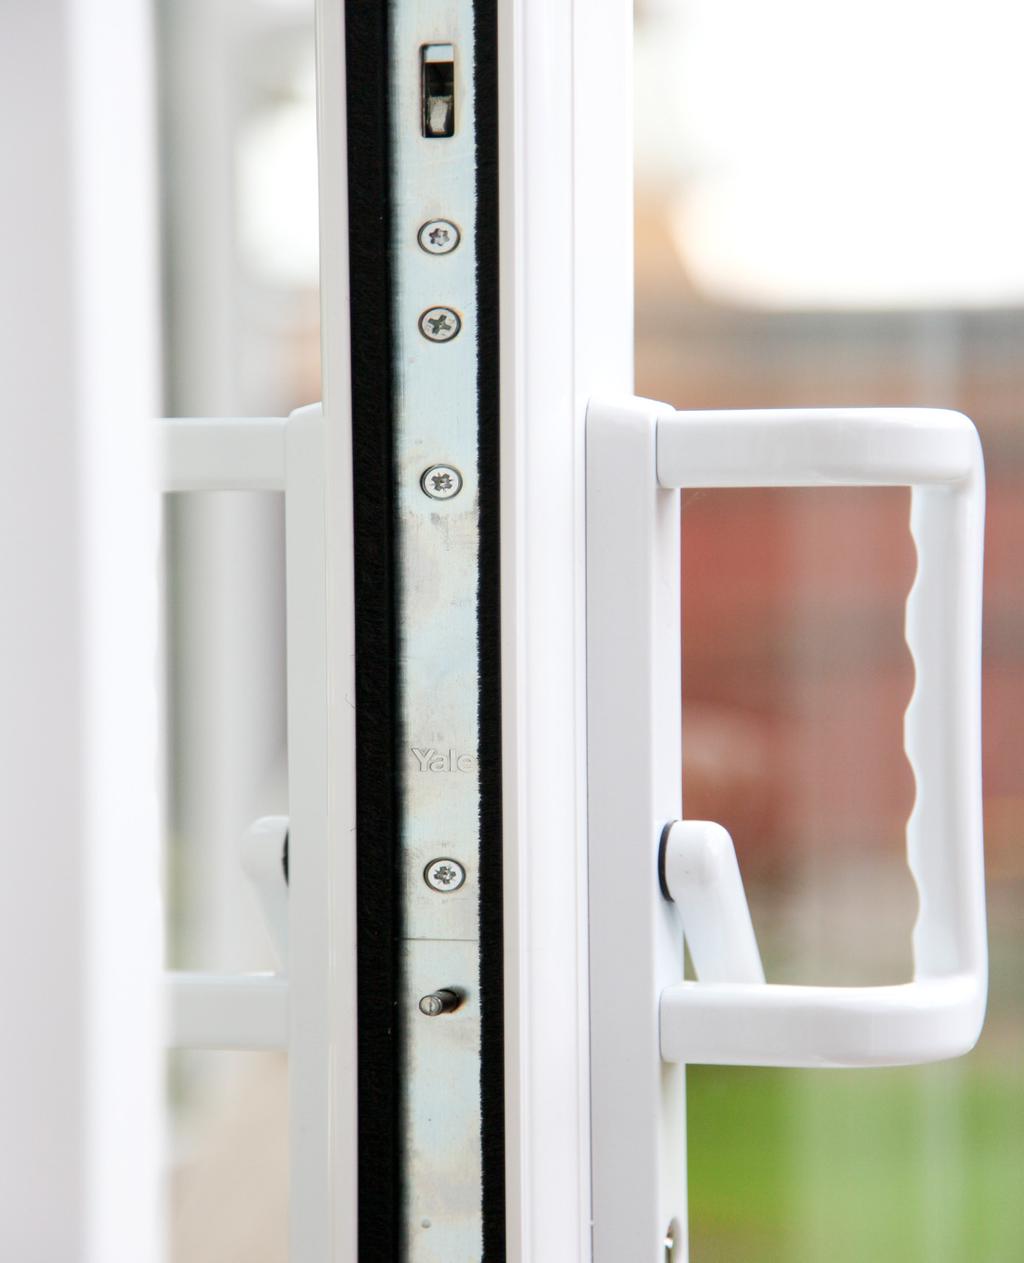 8 Do the locks include anti-lift features? It s a well-known fact that burglars often target patio doors to gain access.